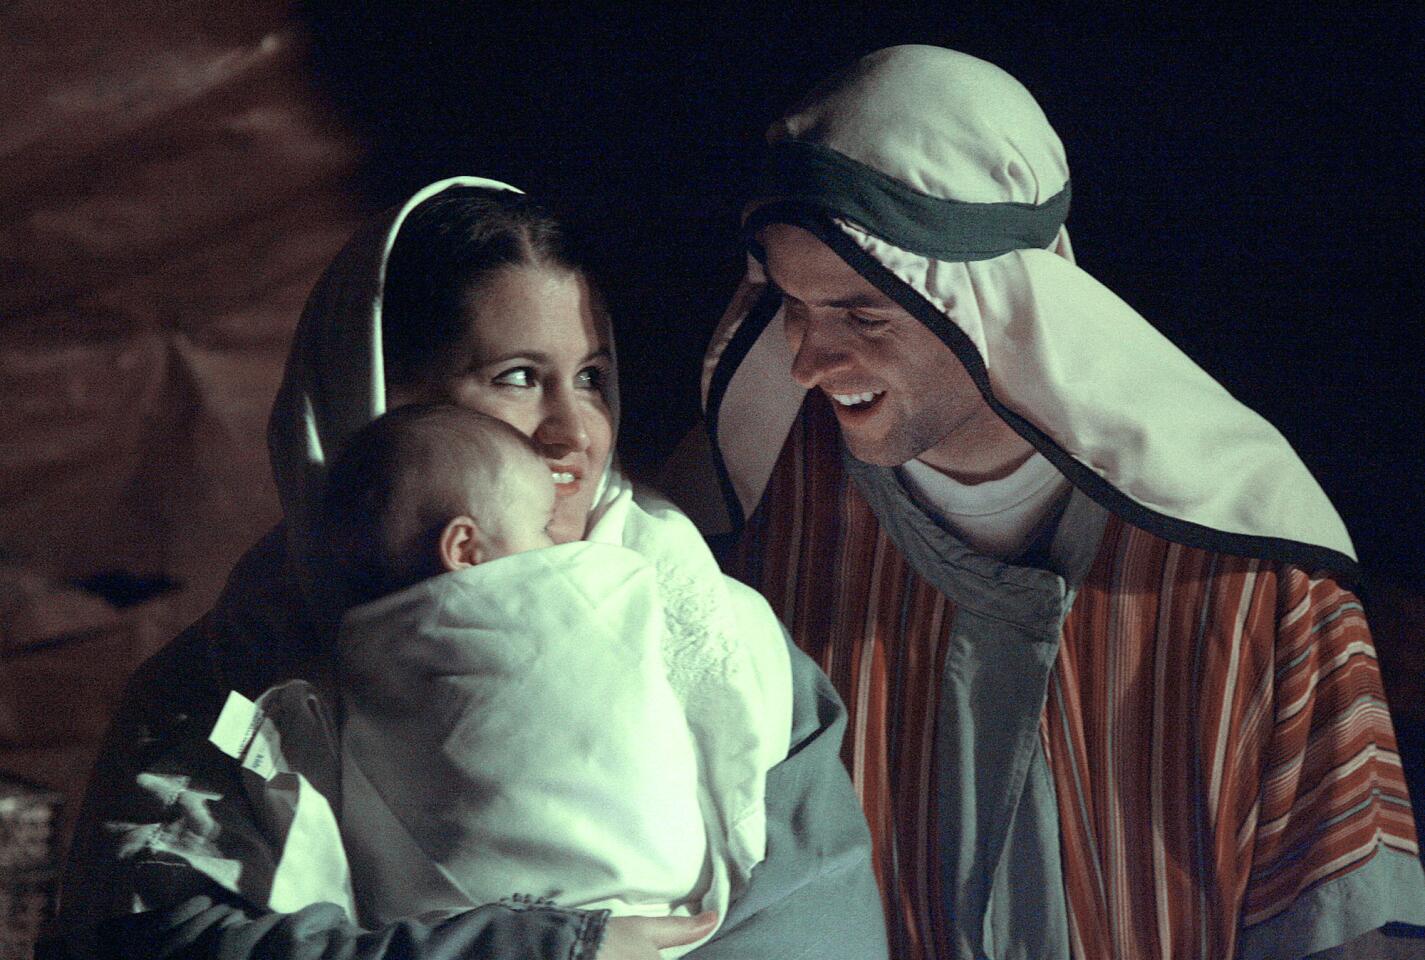 Photo Gallery: Live nativity scene and over 300 nativity scenes on display